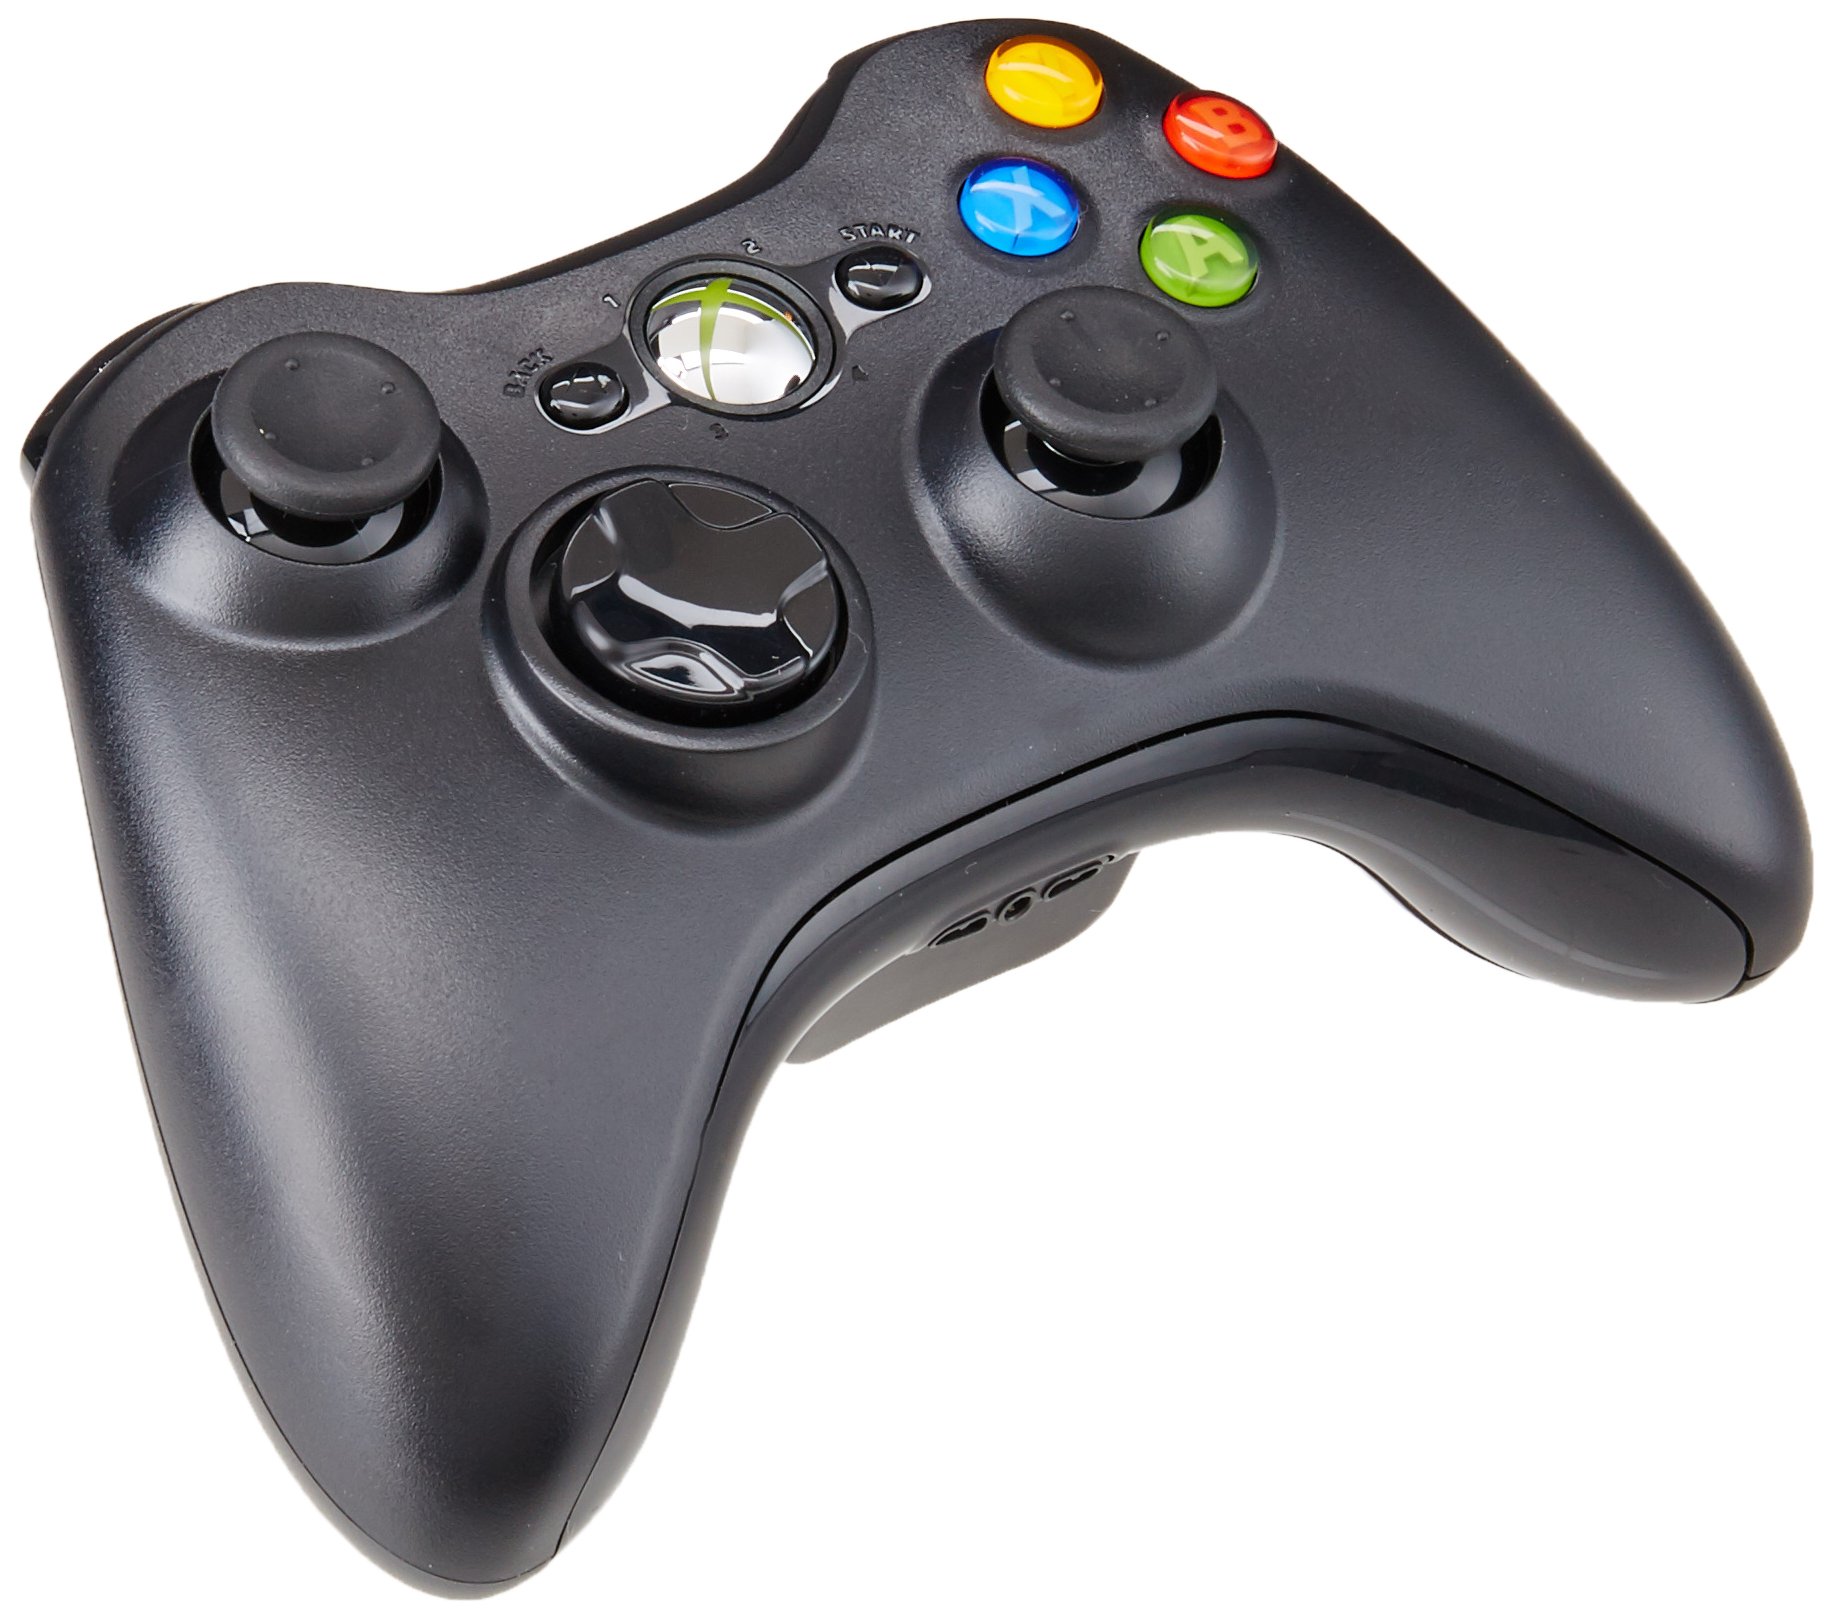 How To Update An Xbox 360 Game Controller On Windows 10